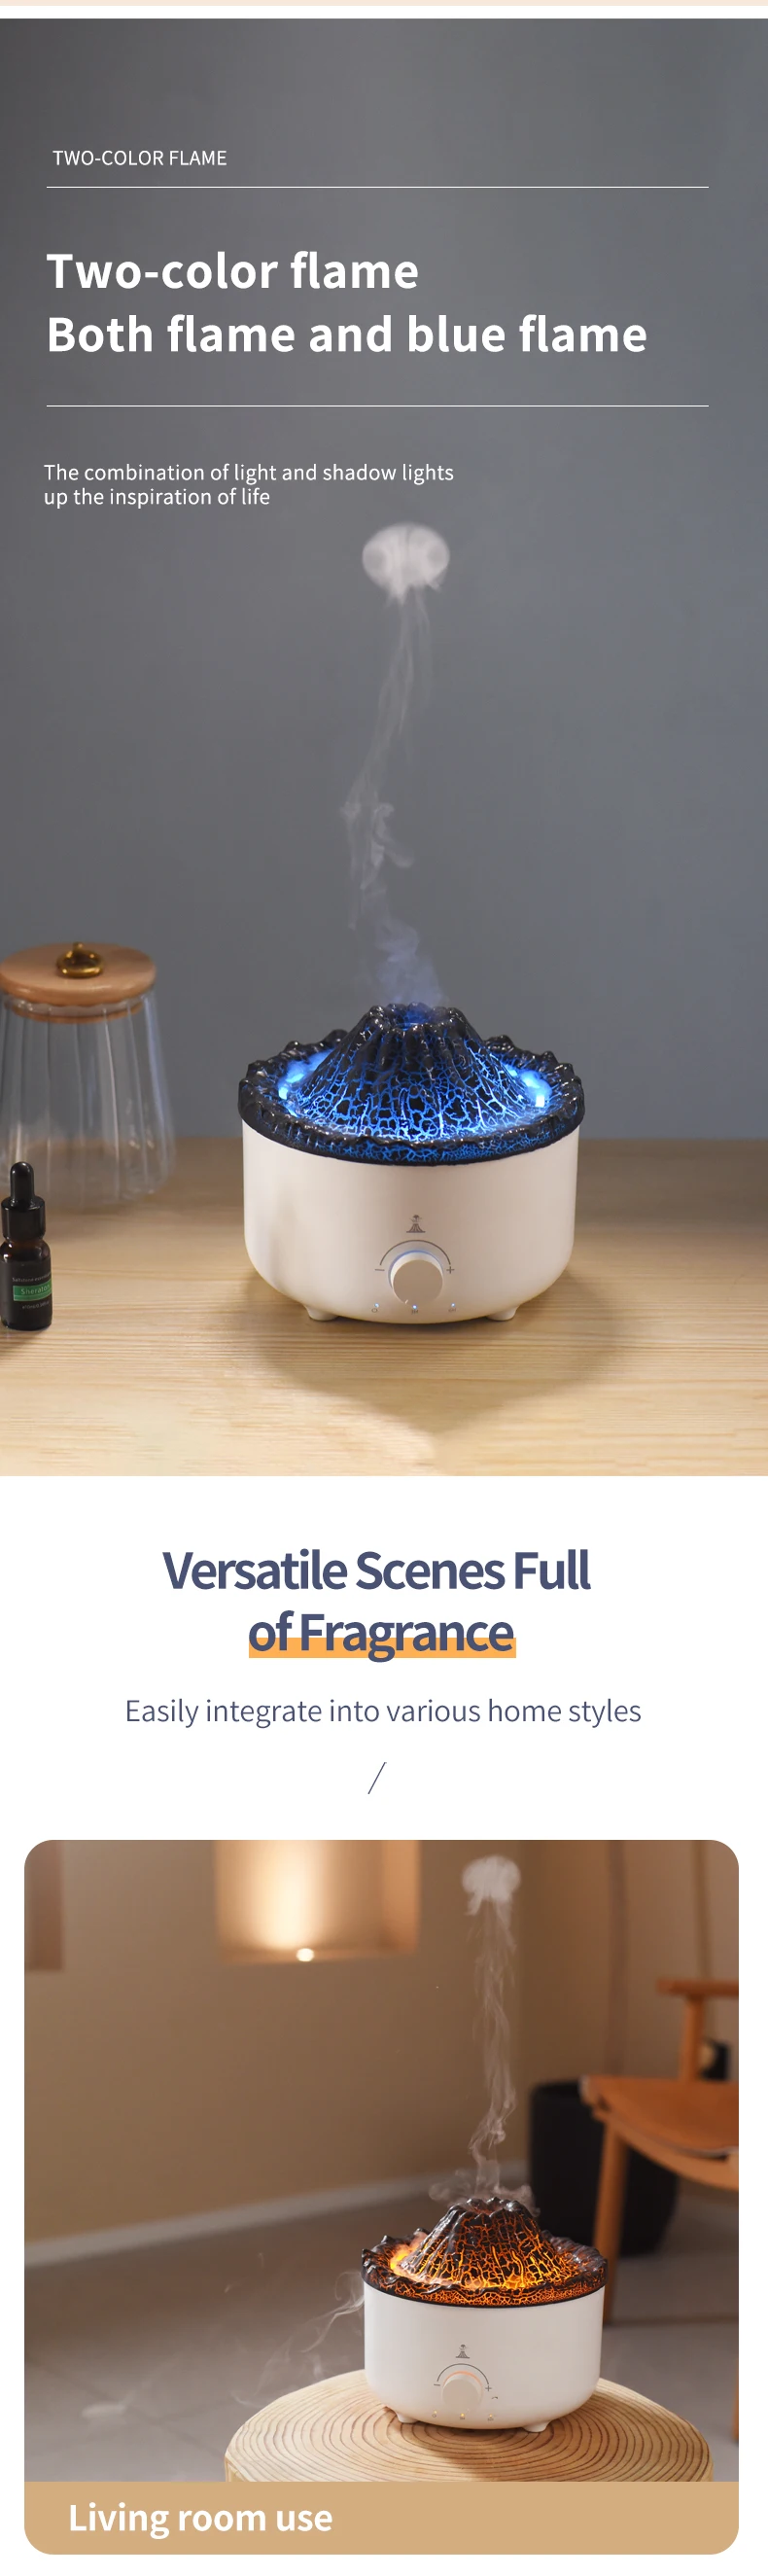 Electric Volcanic Aroma Air Humidifier and Essential Oil Diffuser Product Details